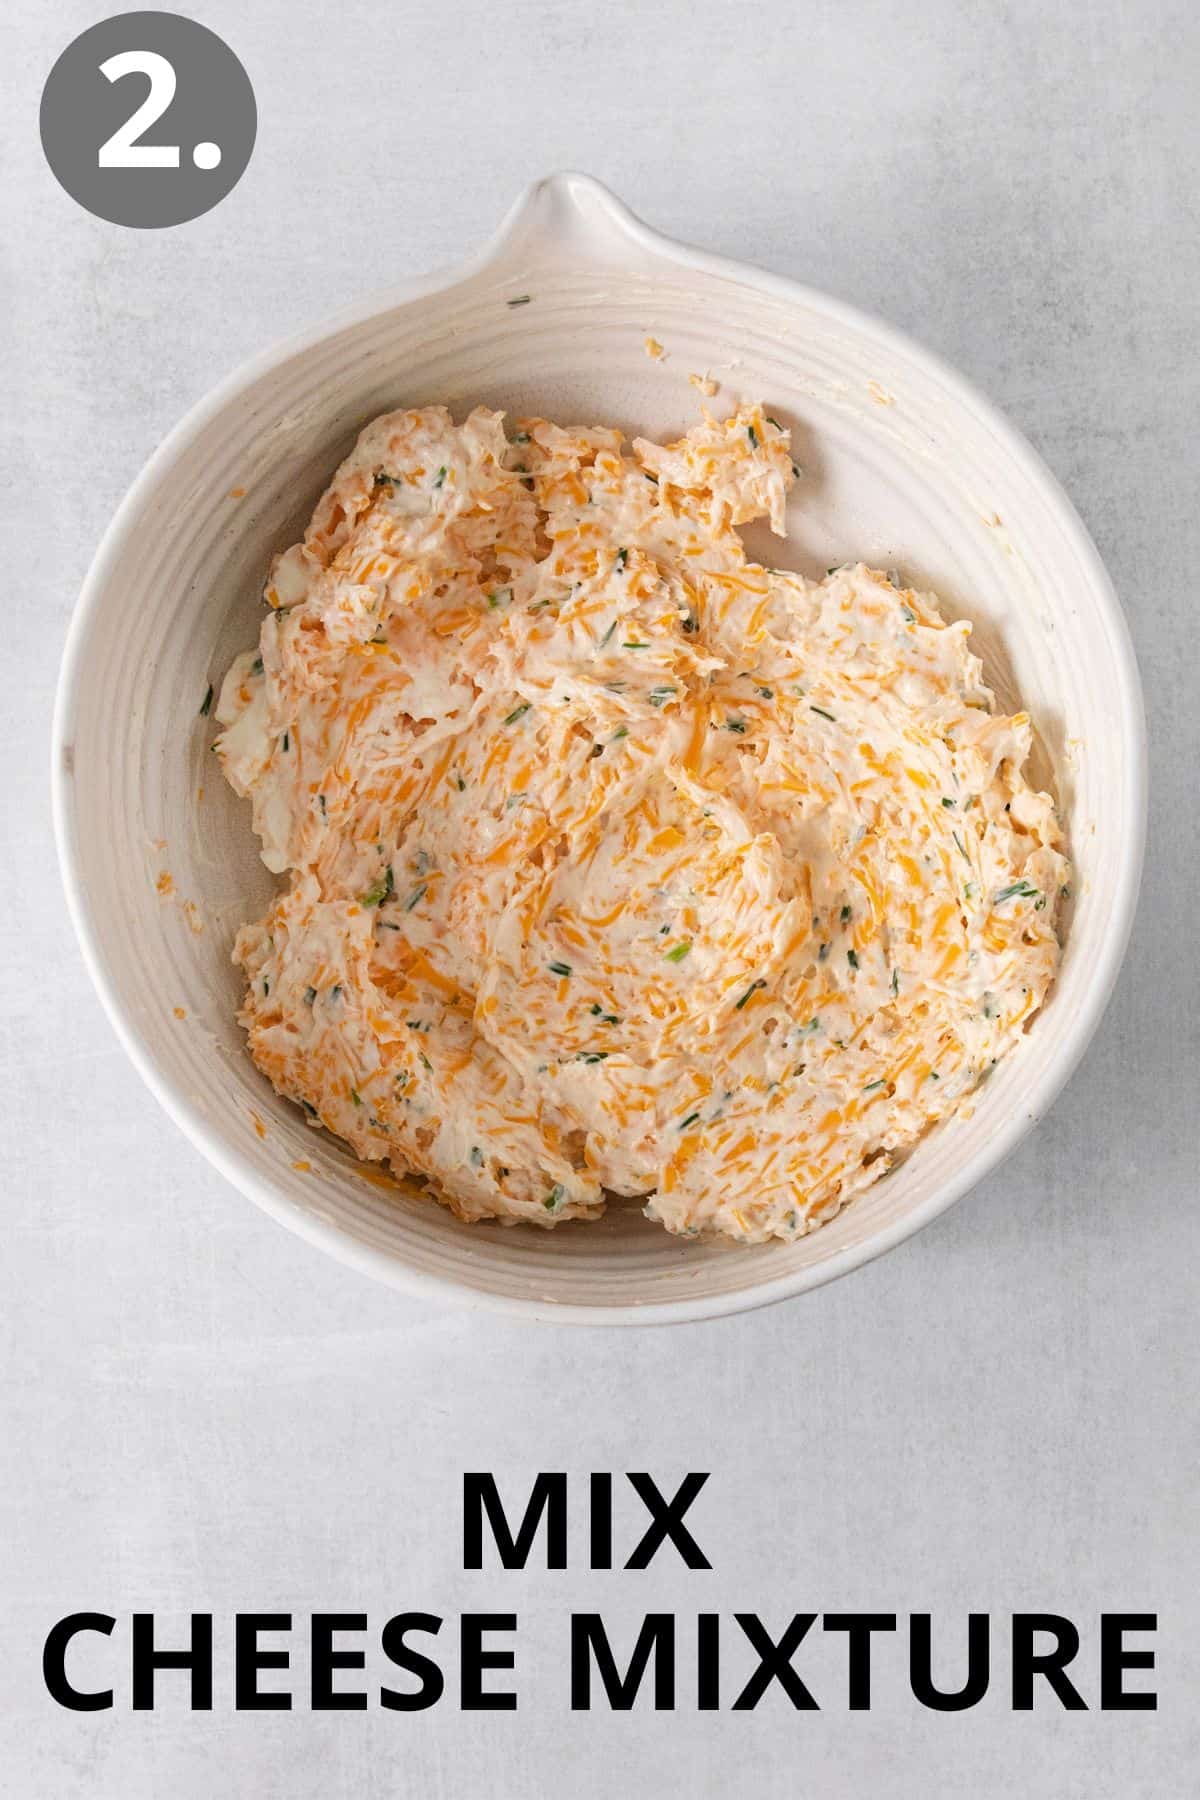 Cheese mixture in a bowl